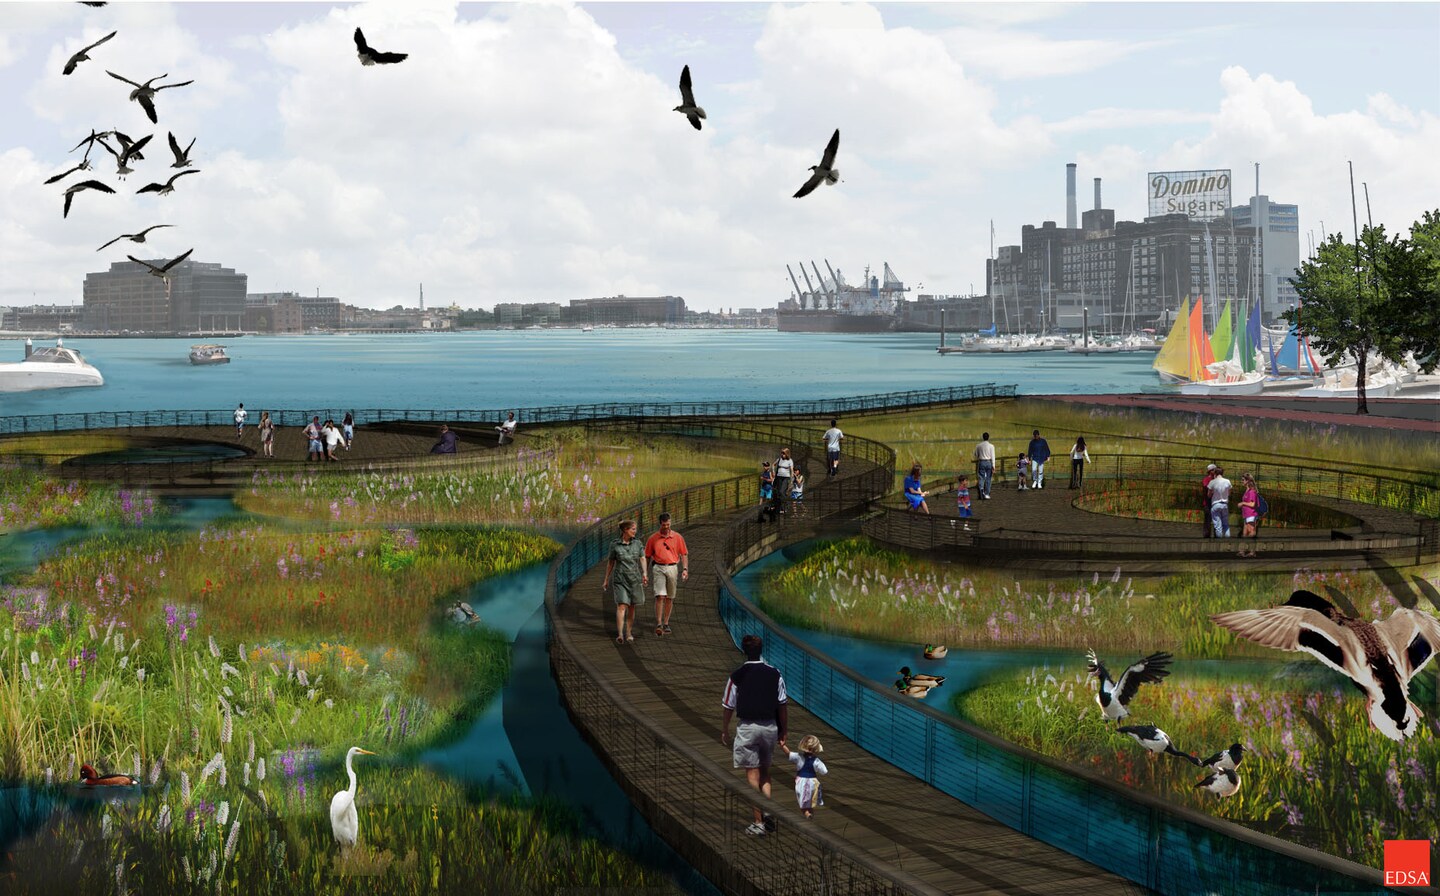 The Harbor Wetland Experience Awaits with an artist's rendering of a park with birds flying over it.